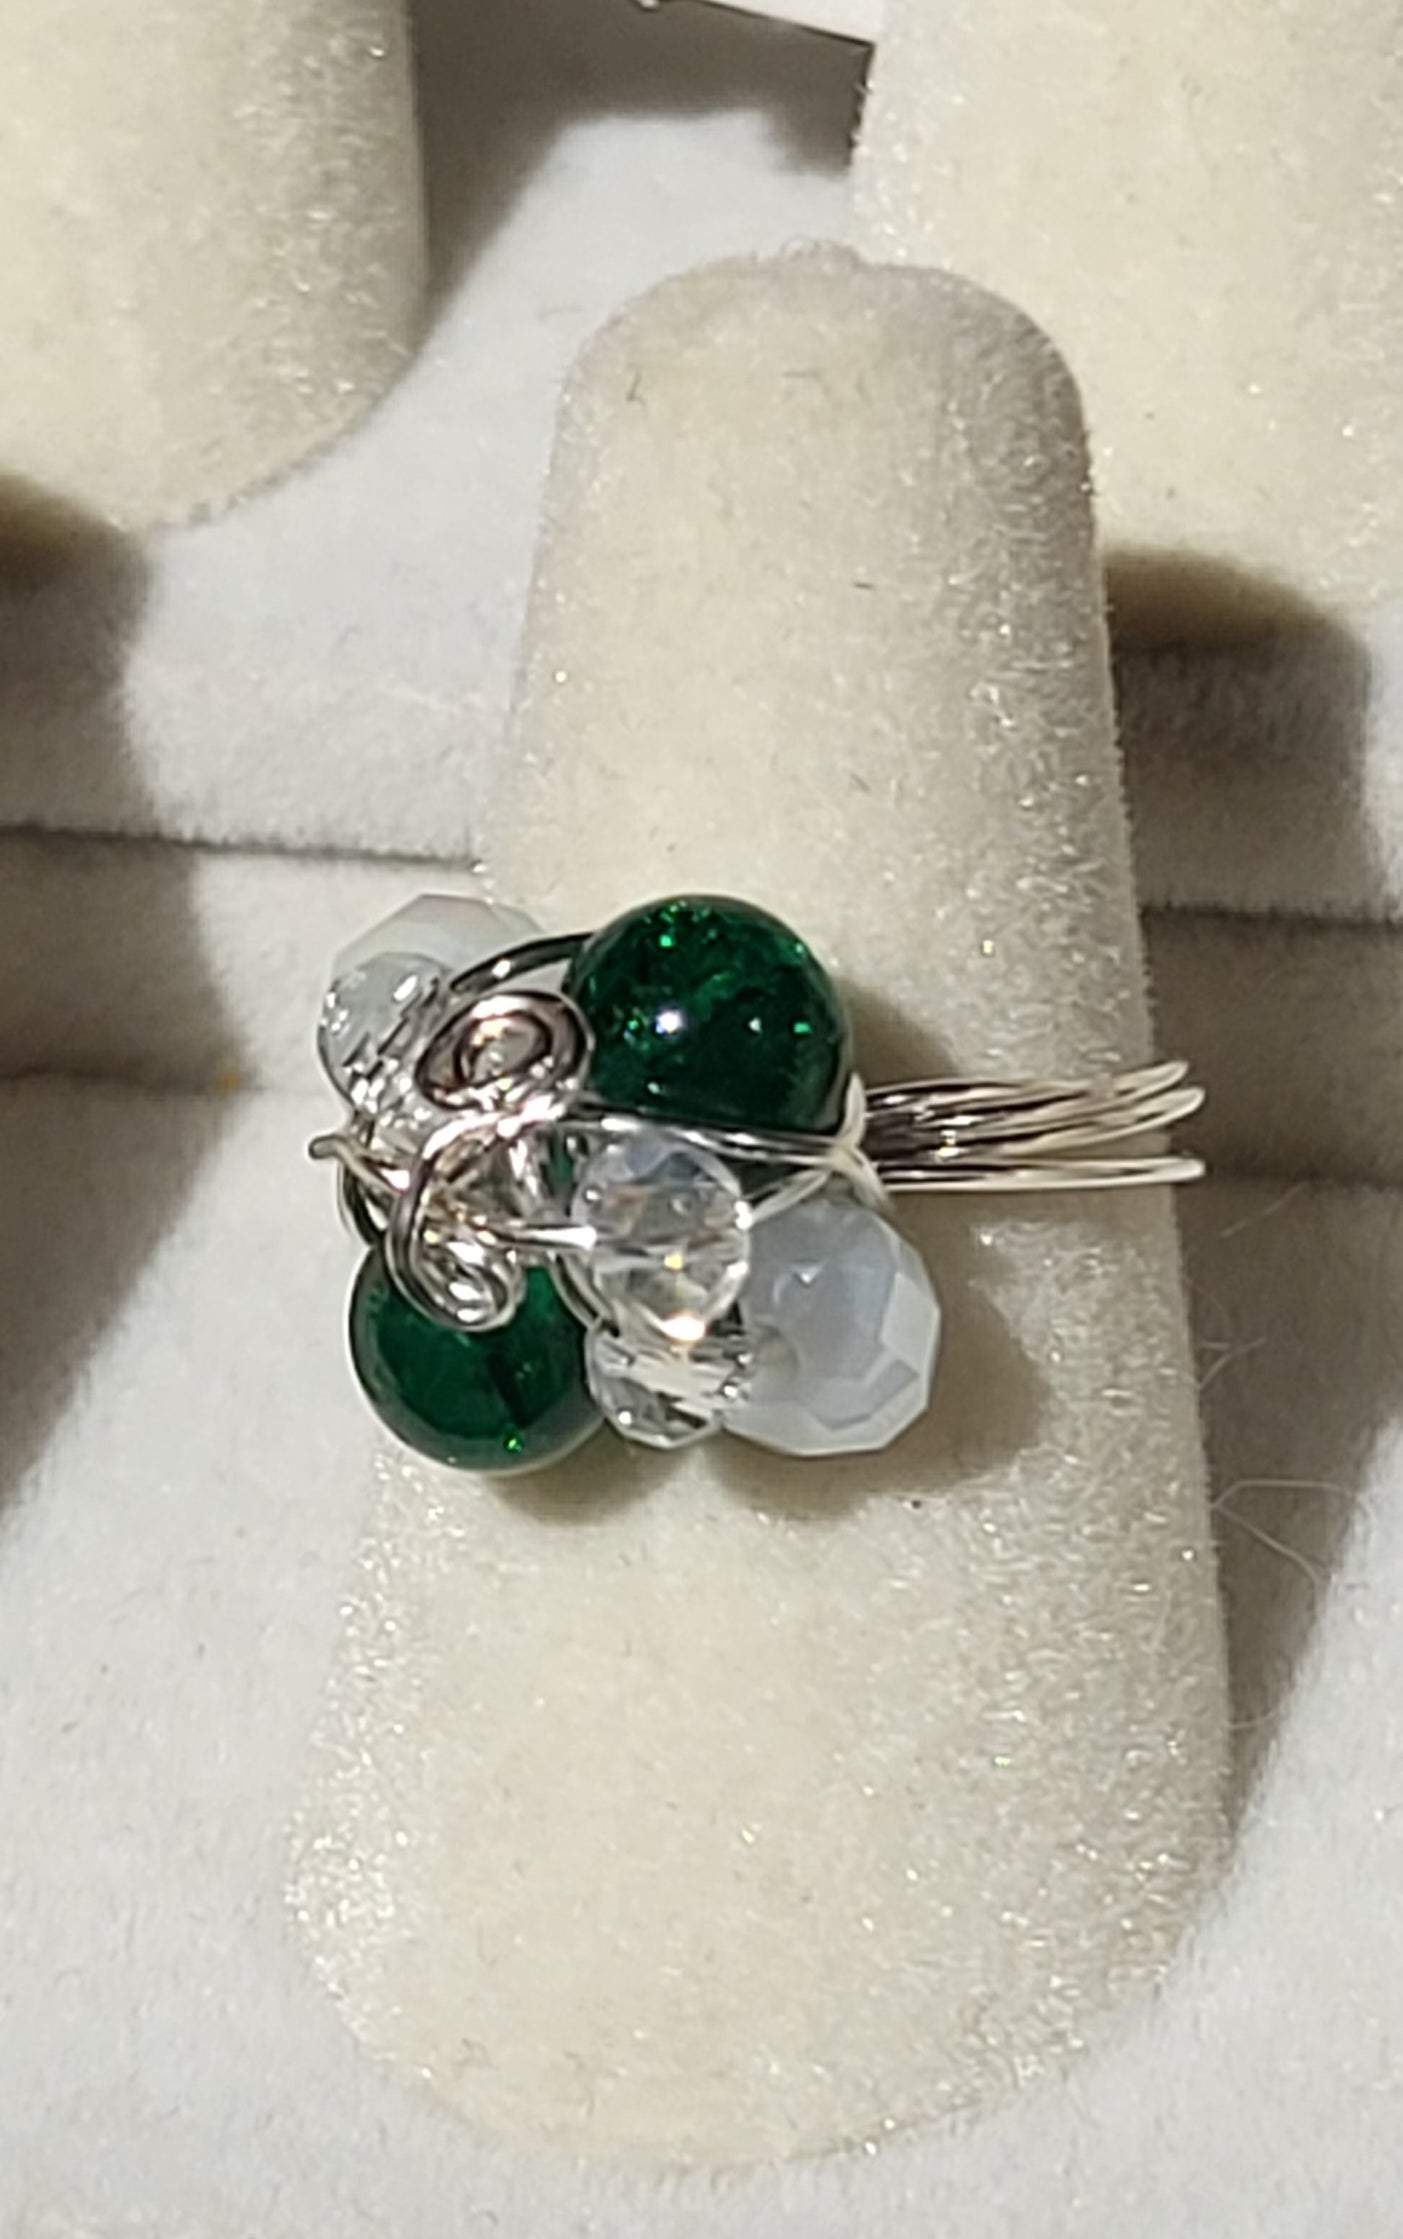 Eagles Colors Green & White Ring size 6.5